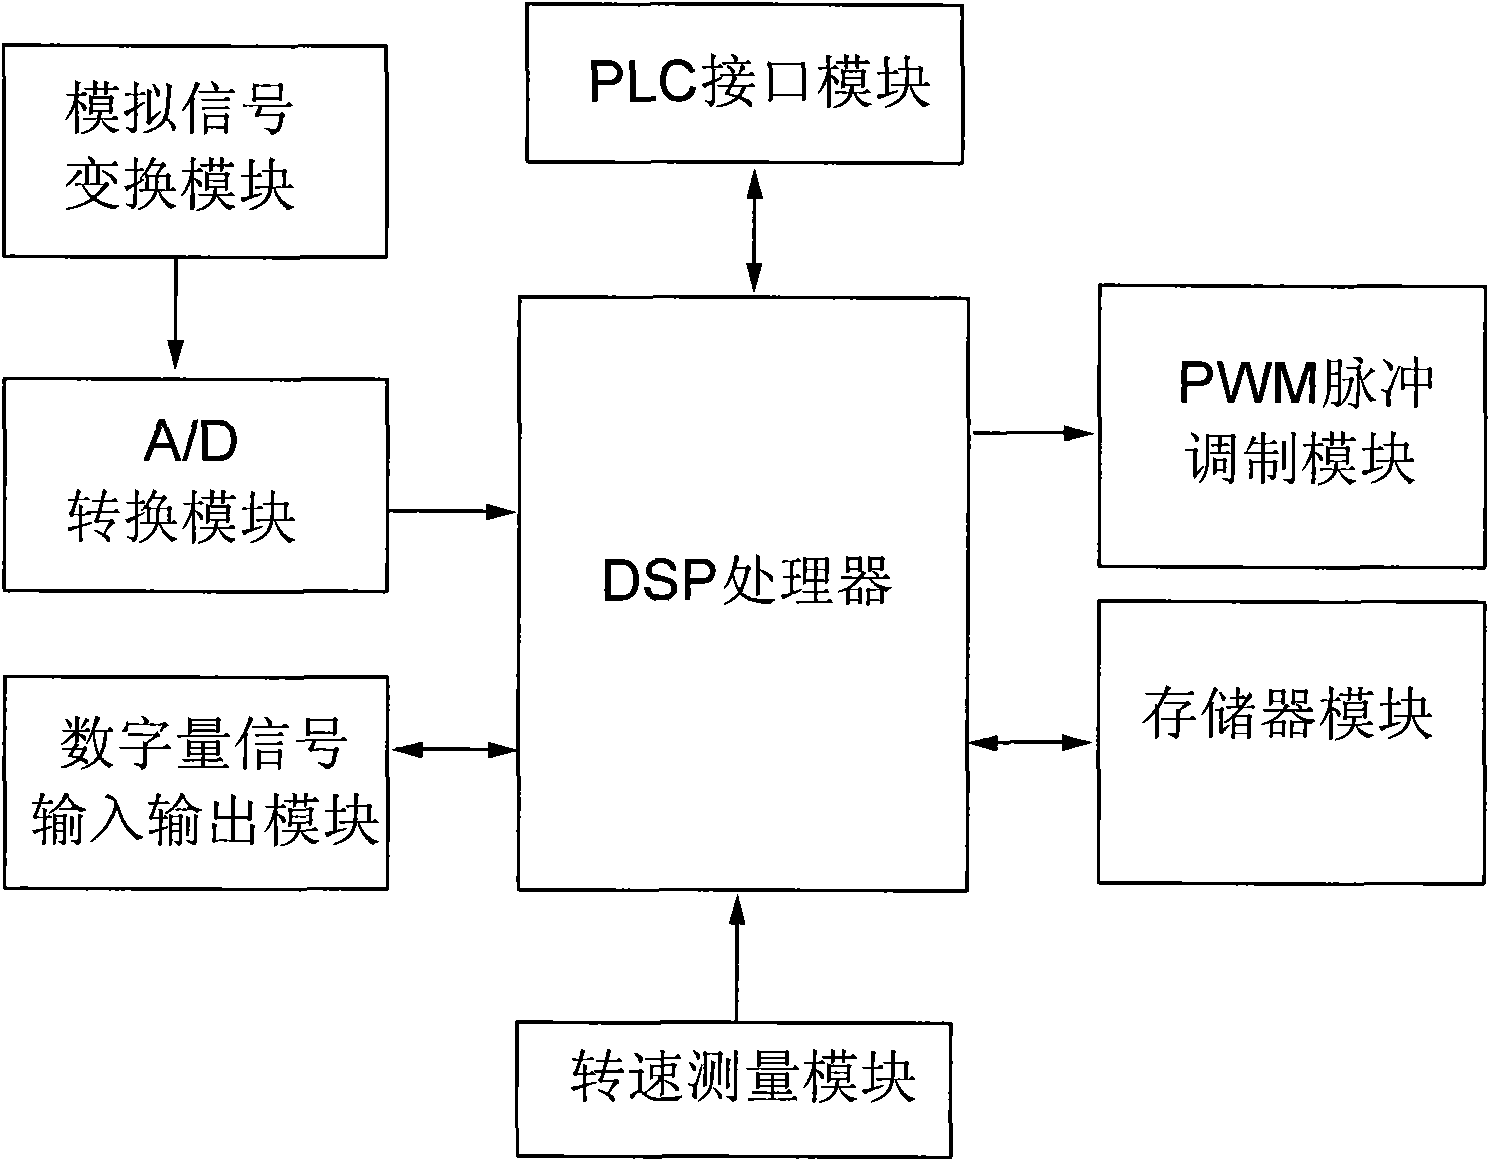 Controller of converter of dual-fed wind power generator